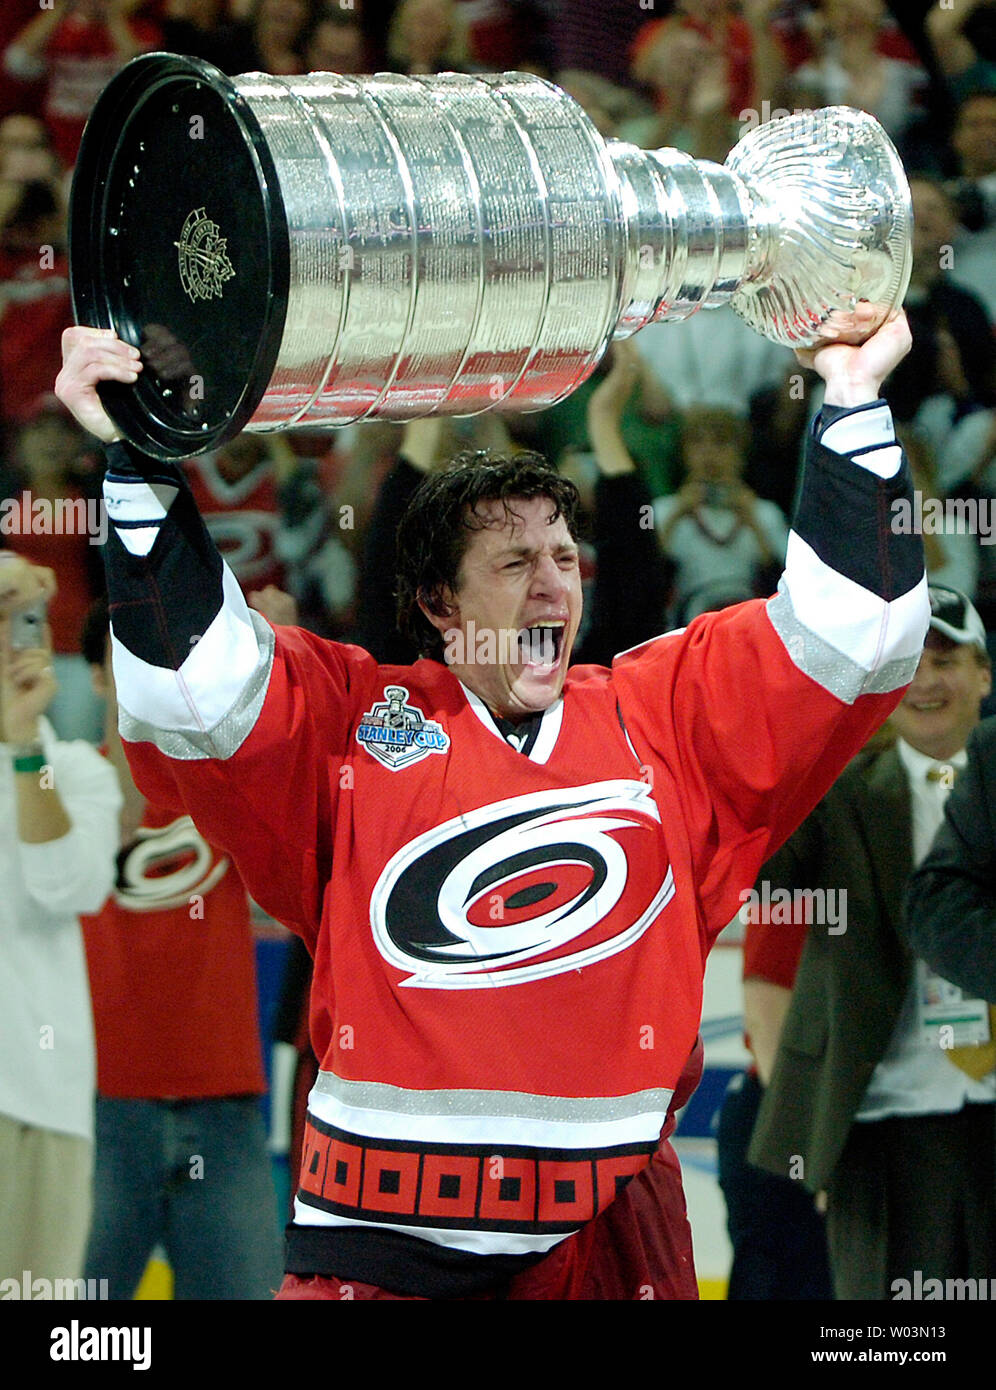 Okay but Rod Brind'Amour hoisting the Cup 🥹 #StanleyCup #nhl #hockey